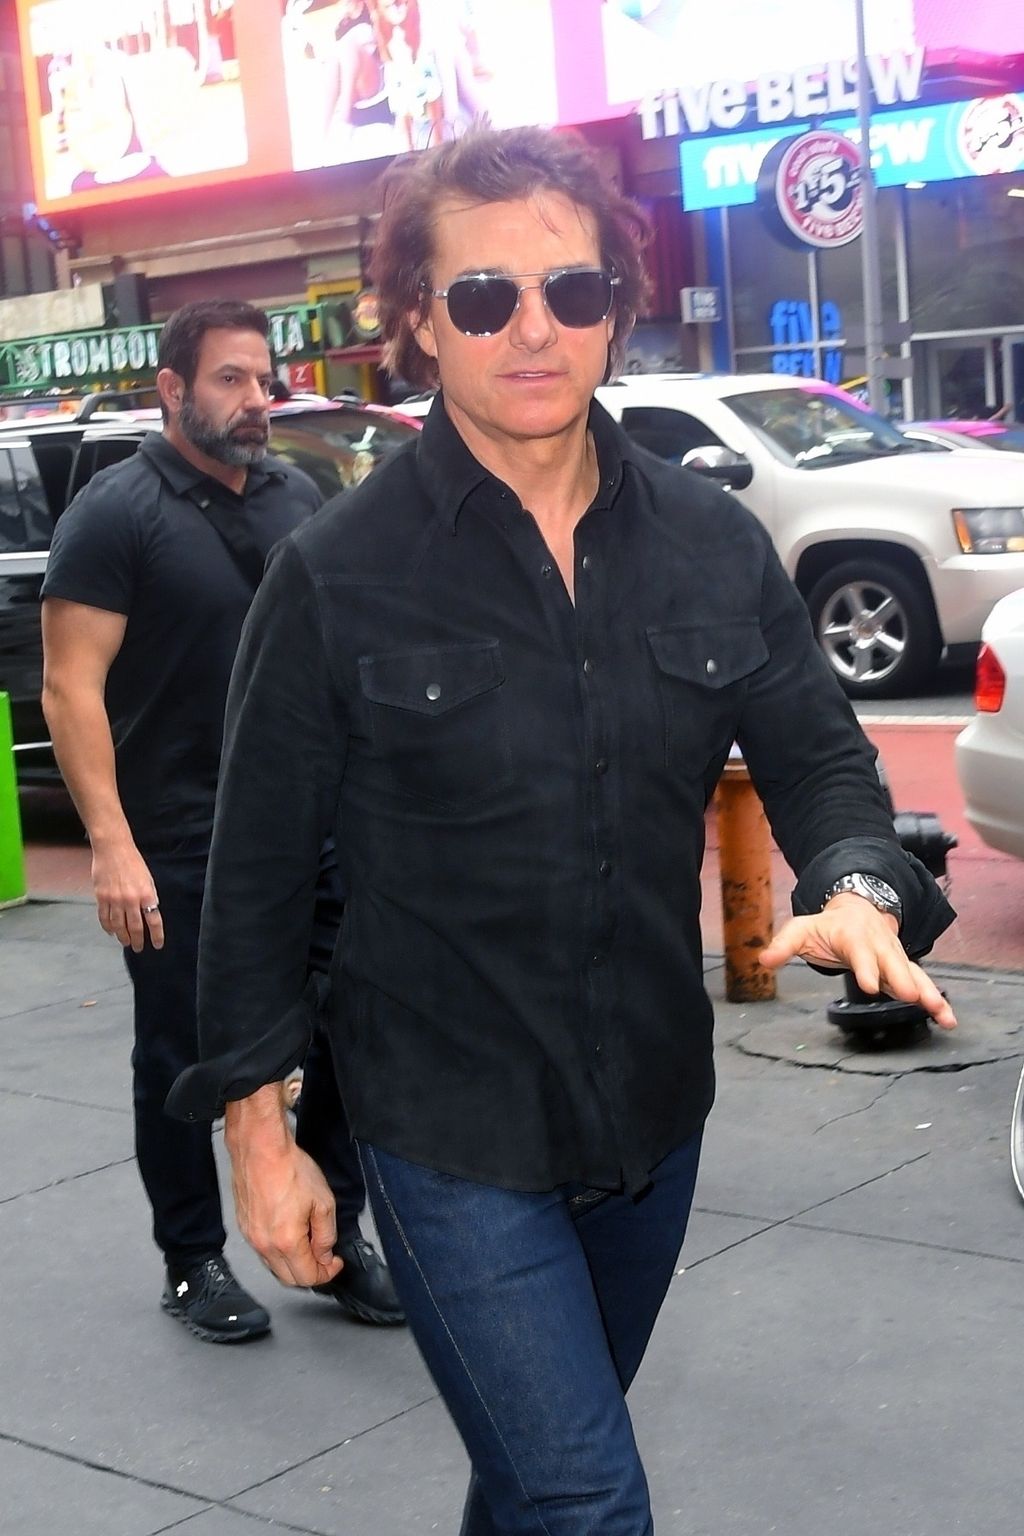 Tom Cruise is seen arriving at AMC in Times Square promoting his latest Mission: Impossible film 